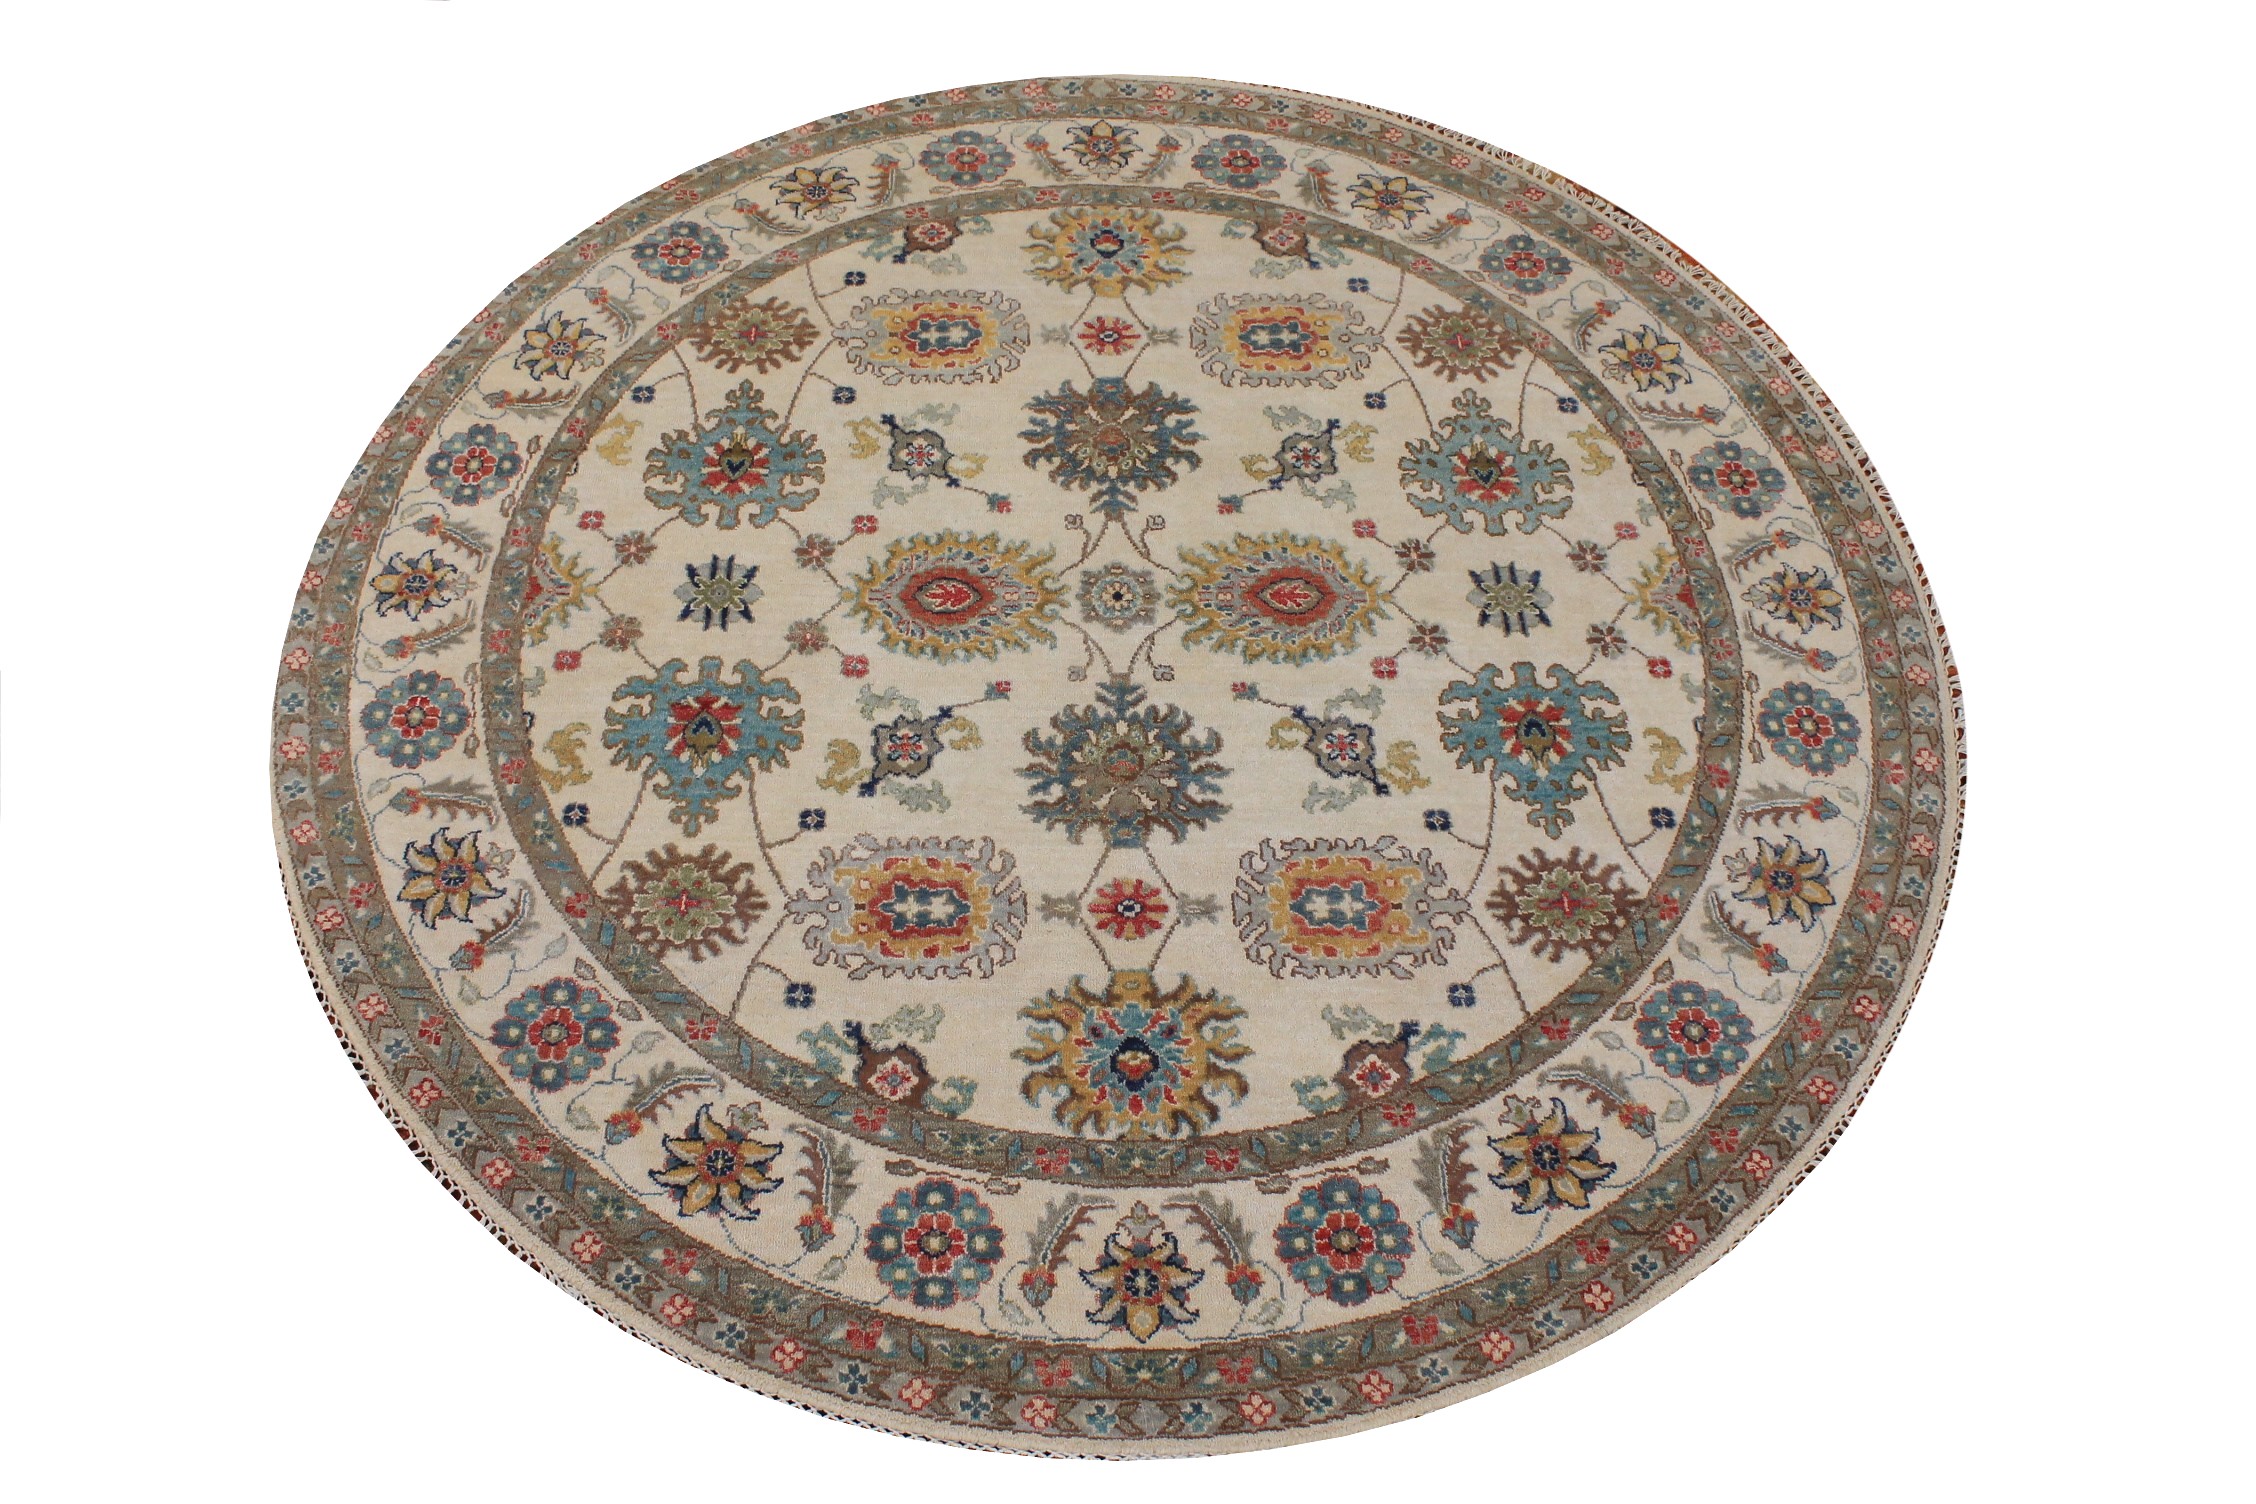 6 ft. - 7 ft. Round & Square Traditional Hand Knotted Wool Area Rug - MR026818